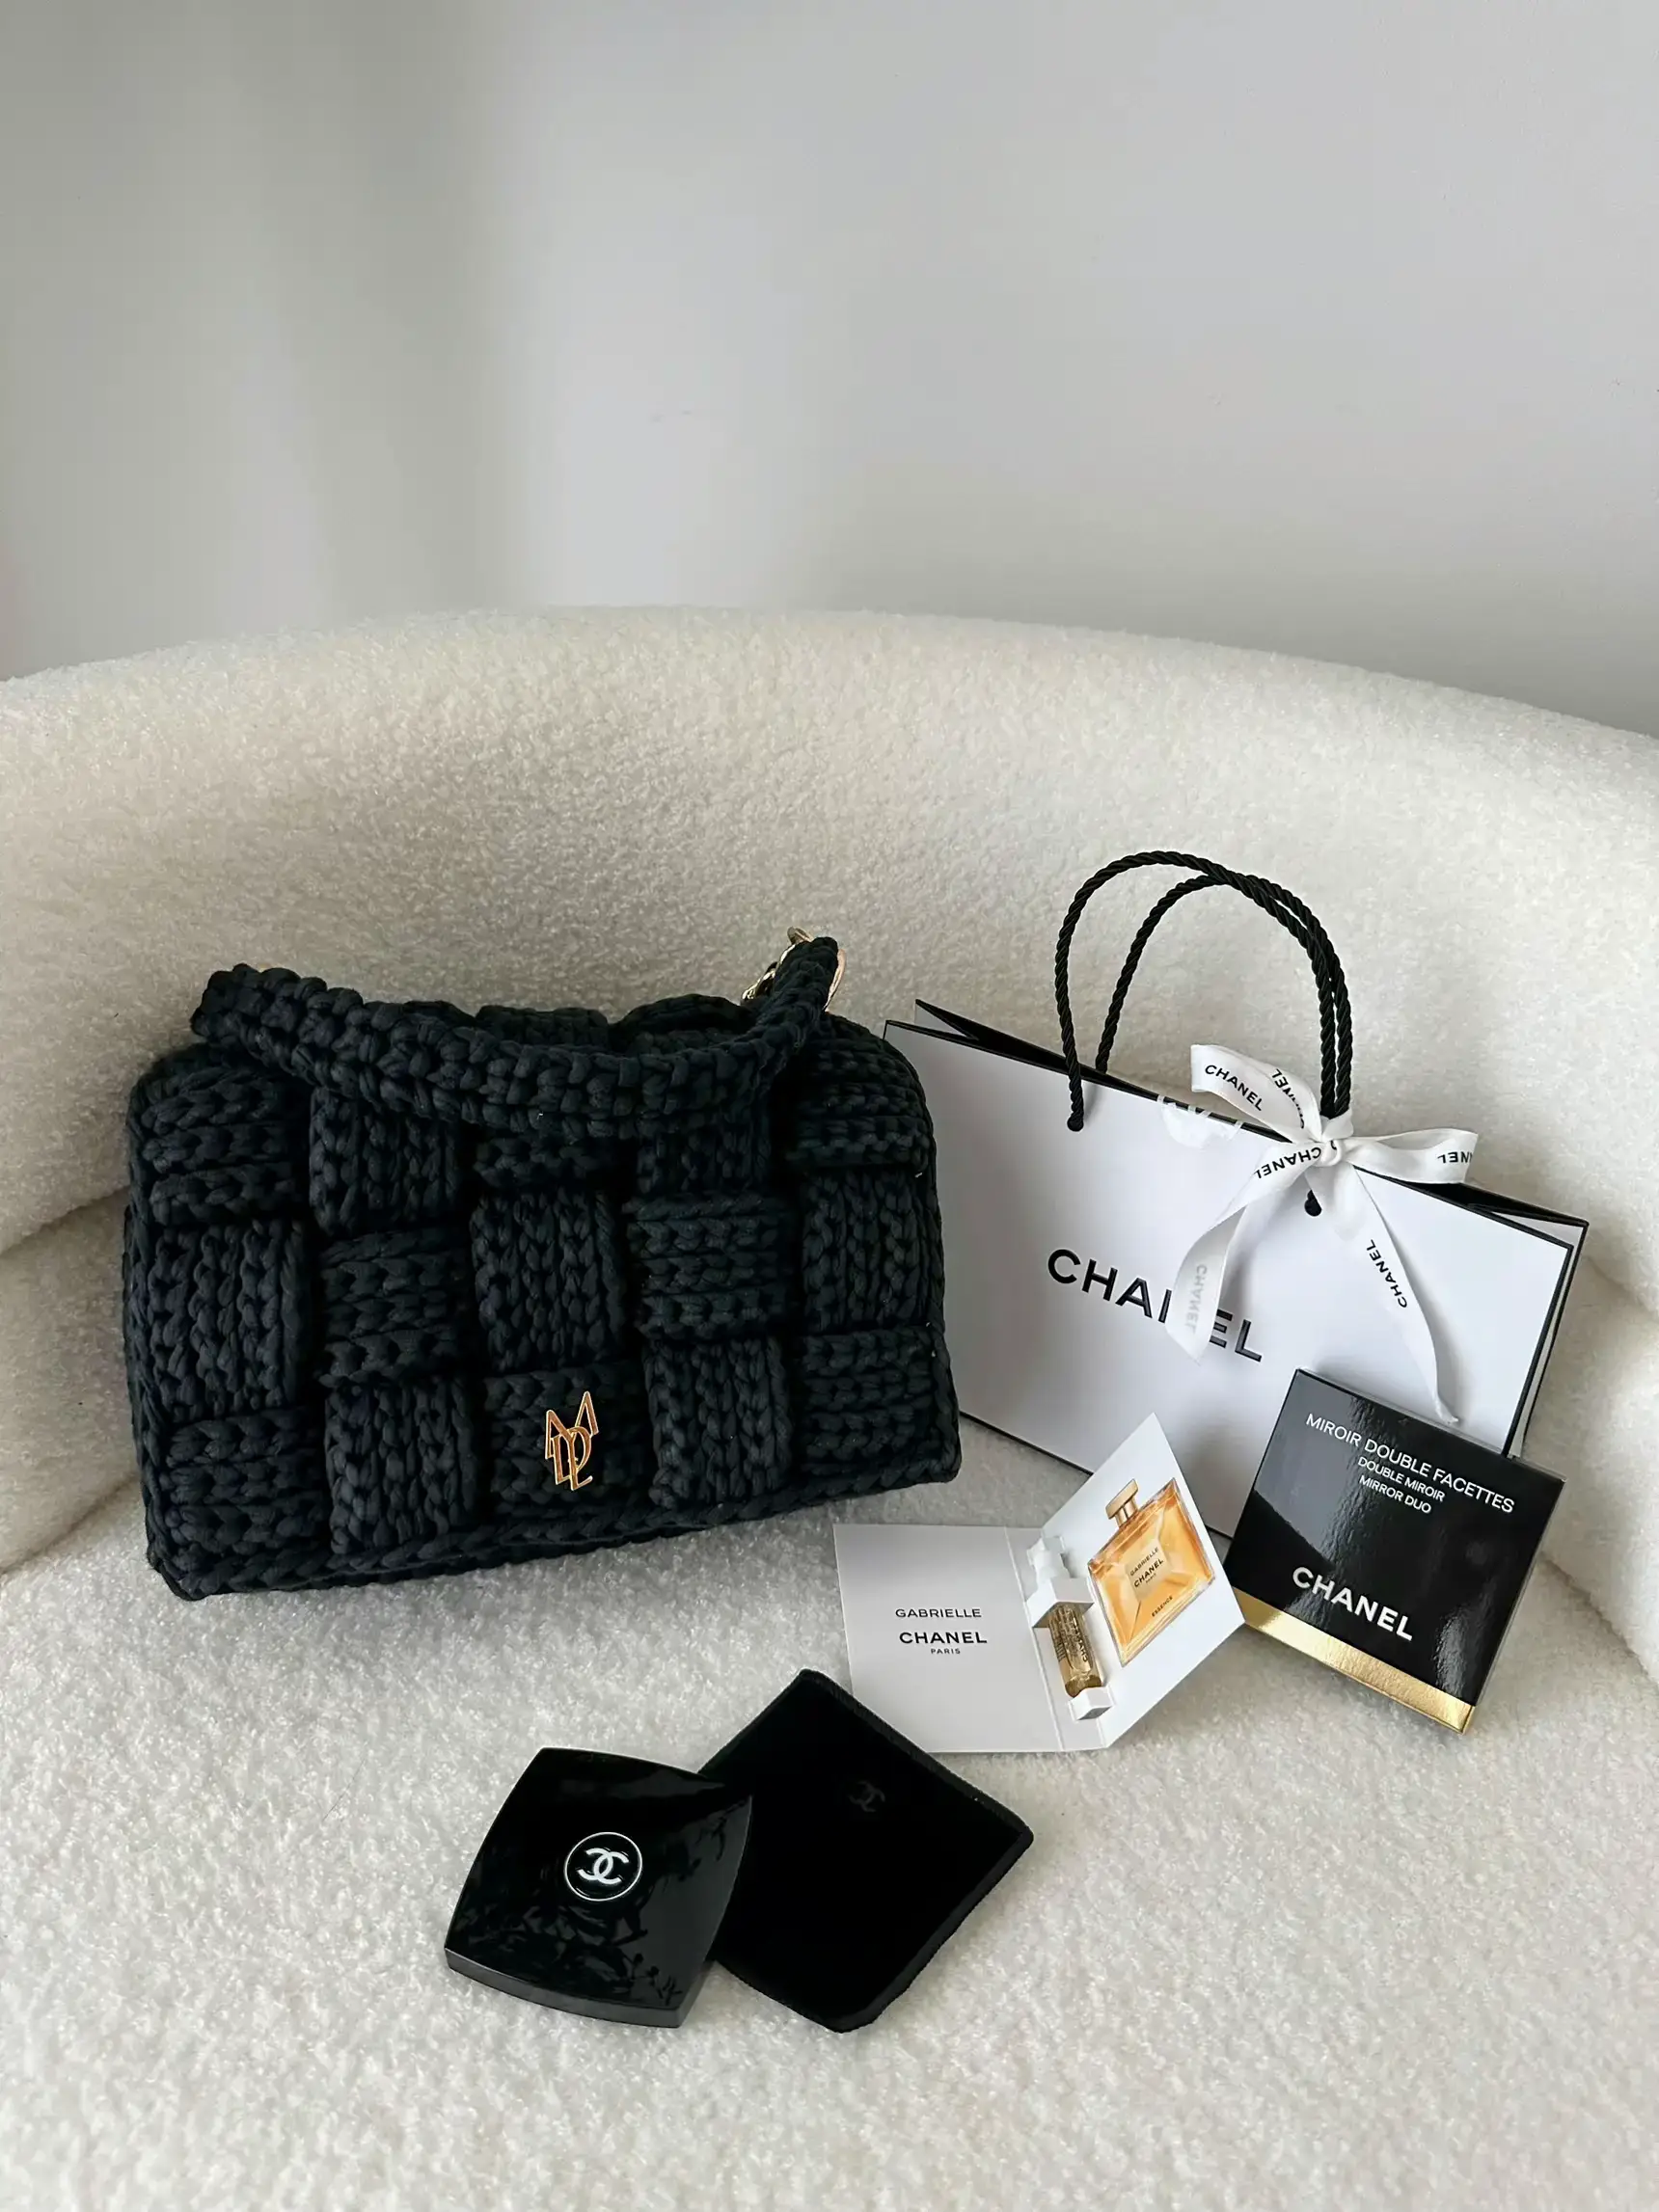 CHANEL MIRROR adds chic to the item in the bag. ✨😍, Gallery posted by  Fanggkhao